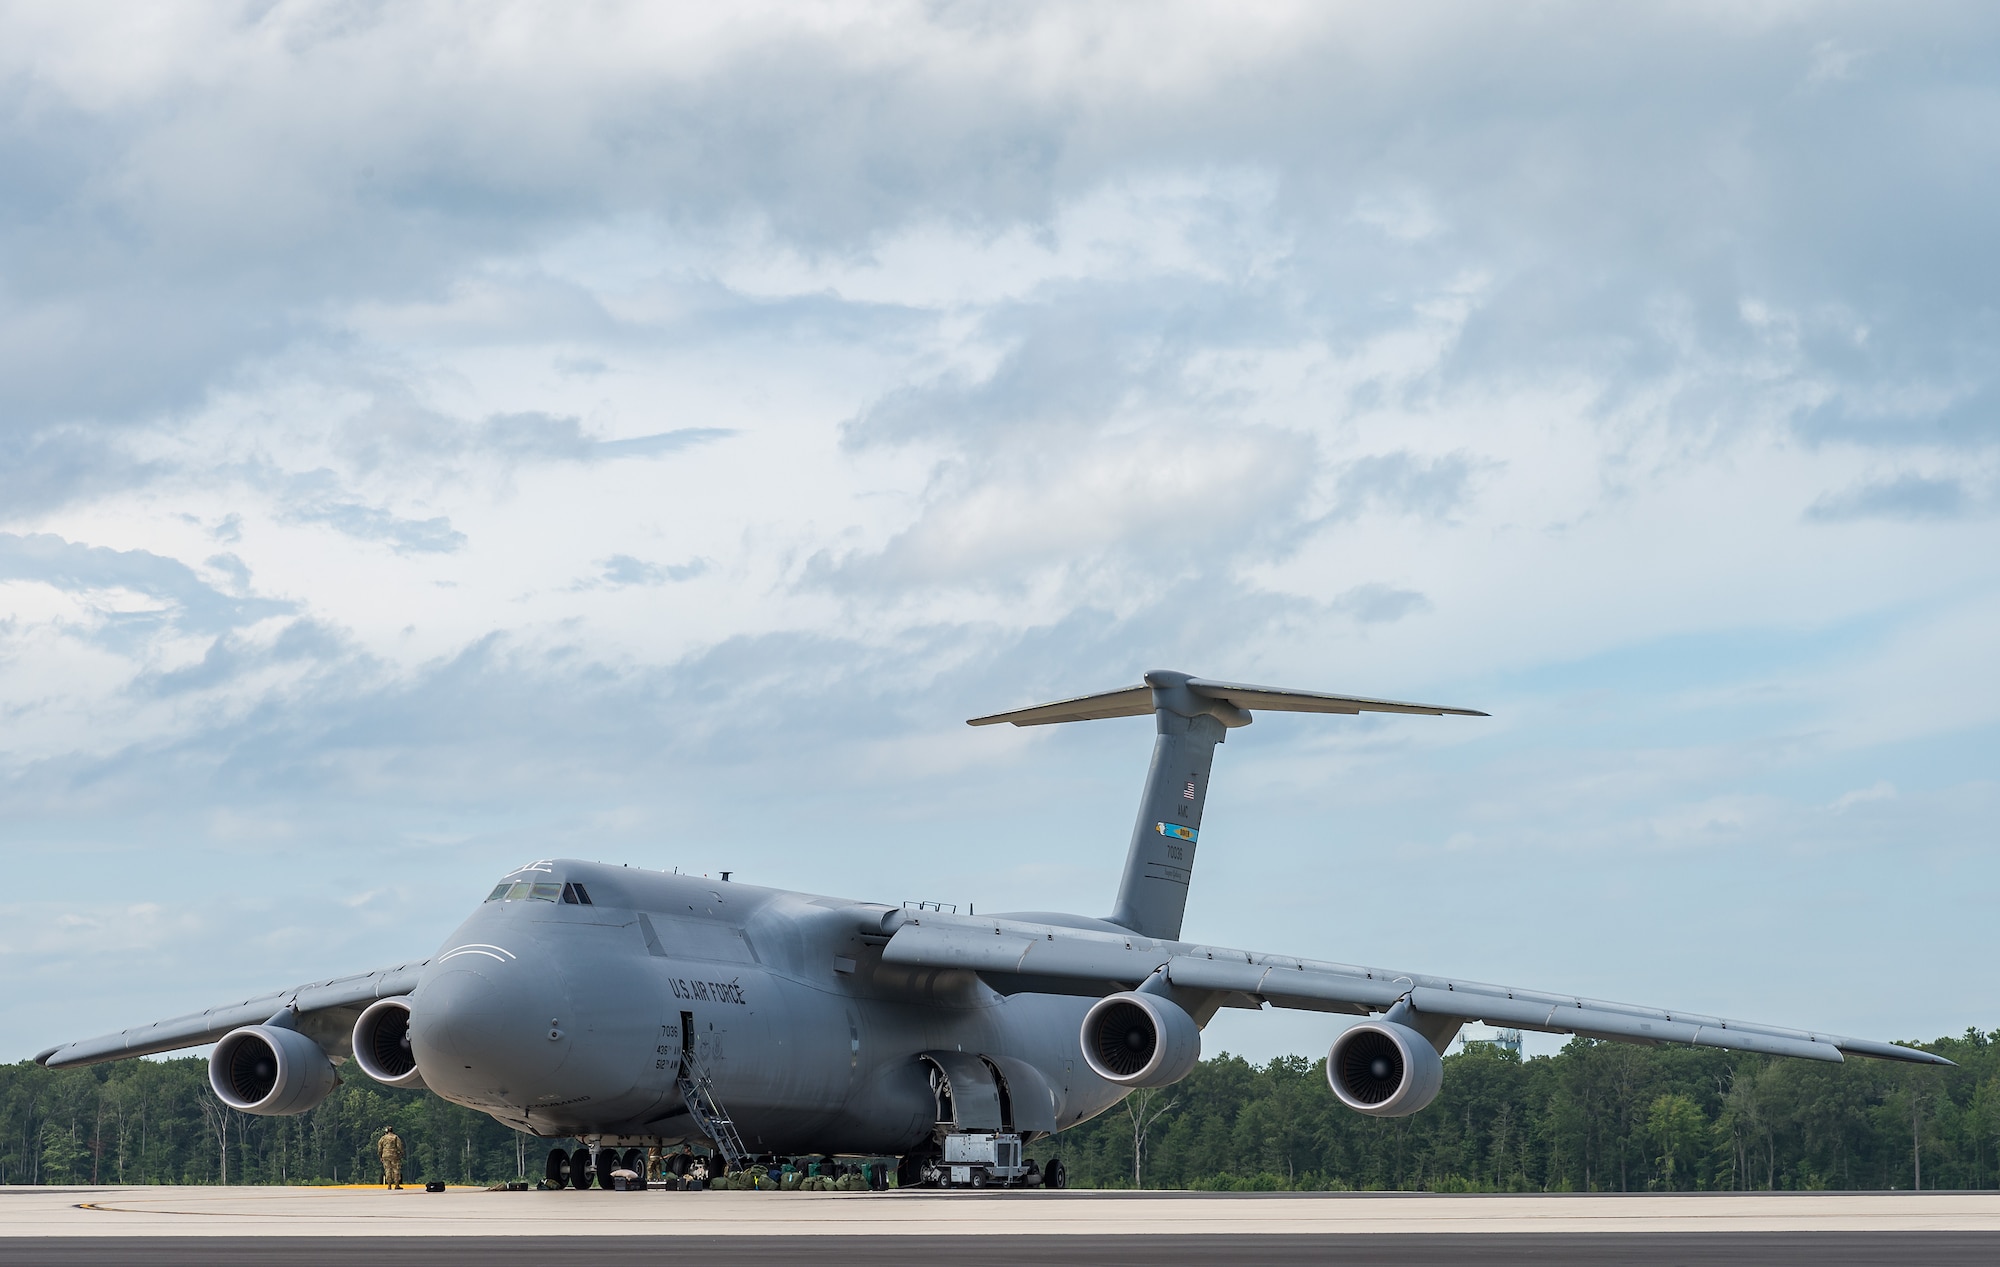 Team Dover members refuel and service a C-5M Super Galaxy prior to its departure from Dover Air Force Base, Delaware, Aug. 18, 2021. The C-5M is a strategic transport aircraft and is the largest aircraft in the U.S. Air Force inventory. (U.S. Air Force photo by Roland Balik)